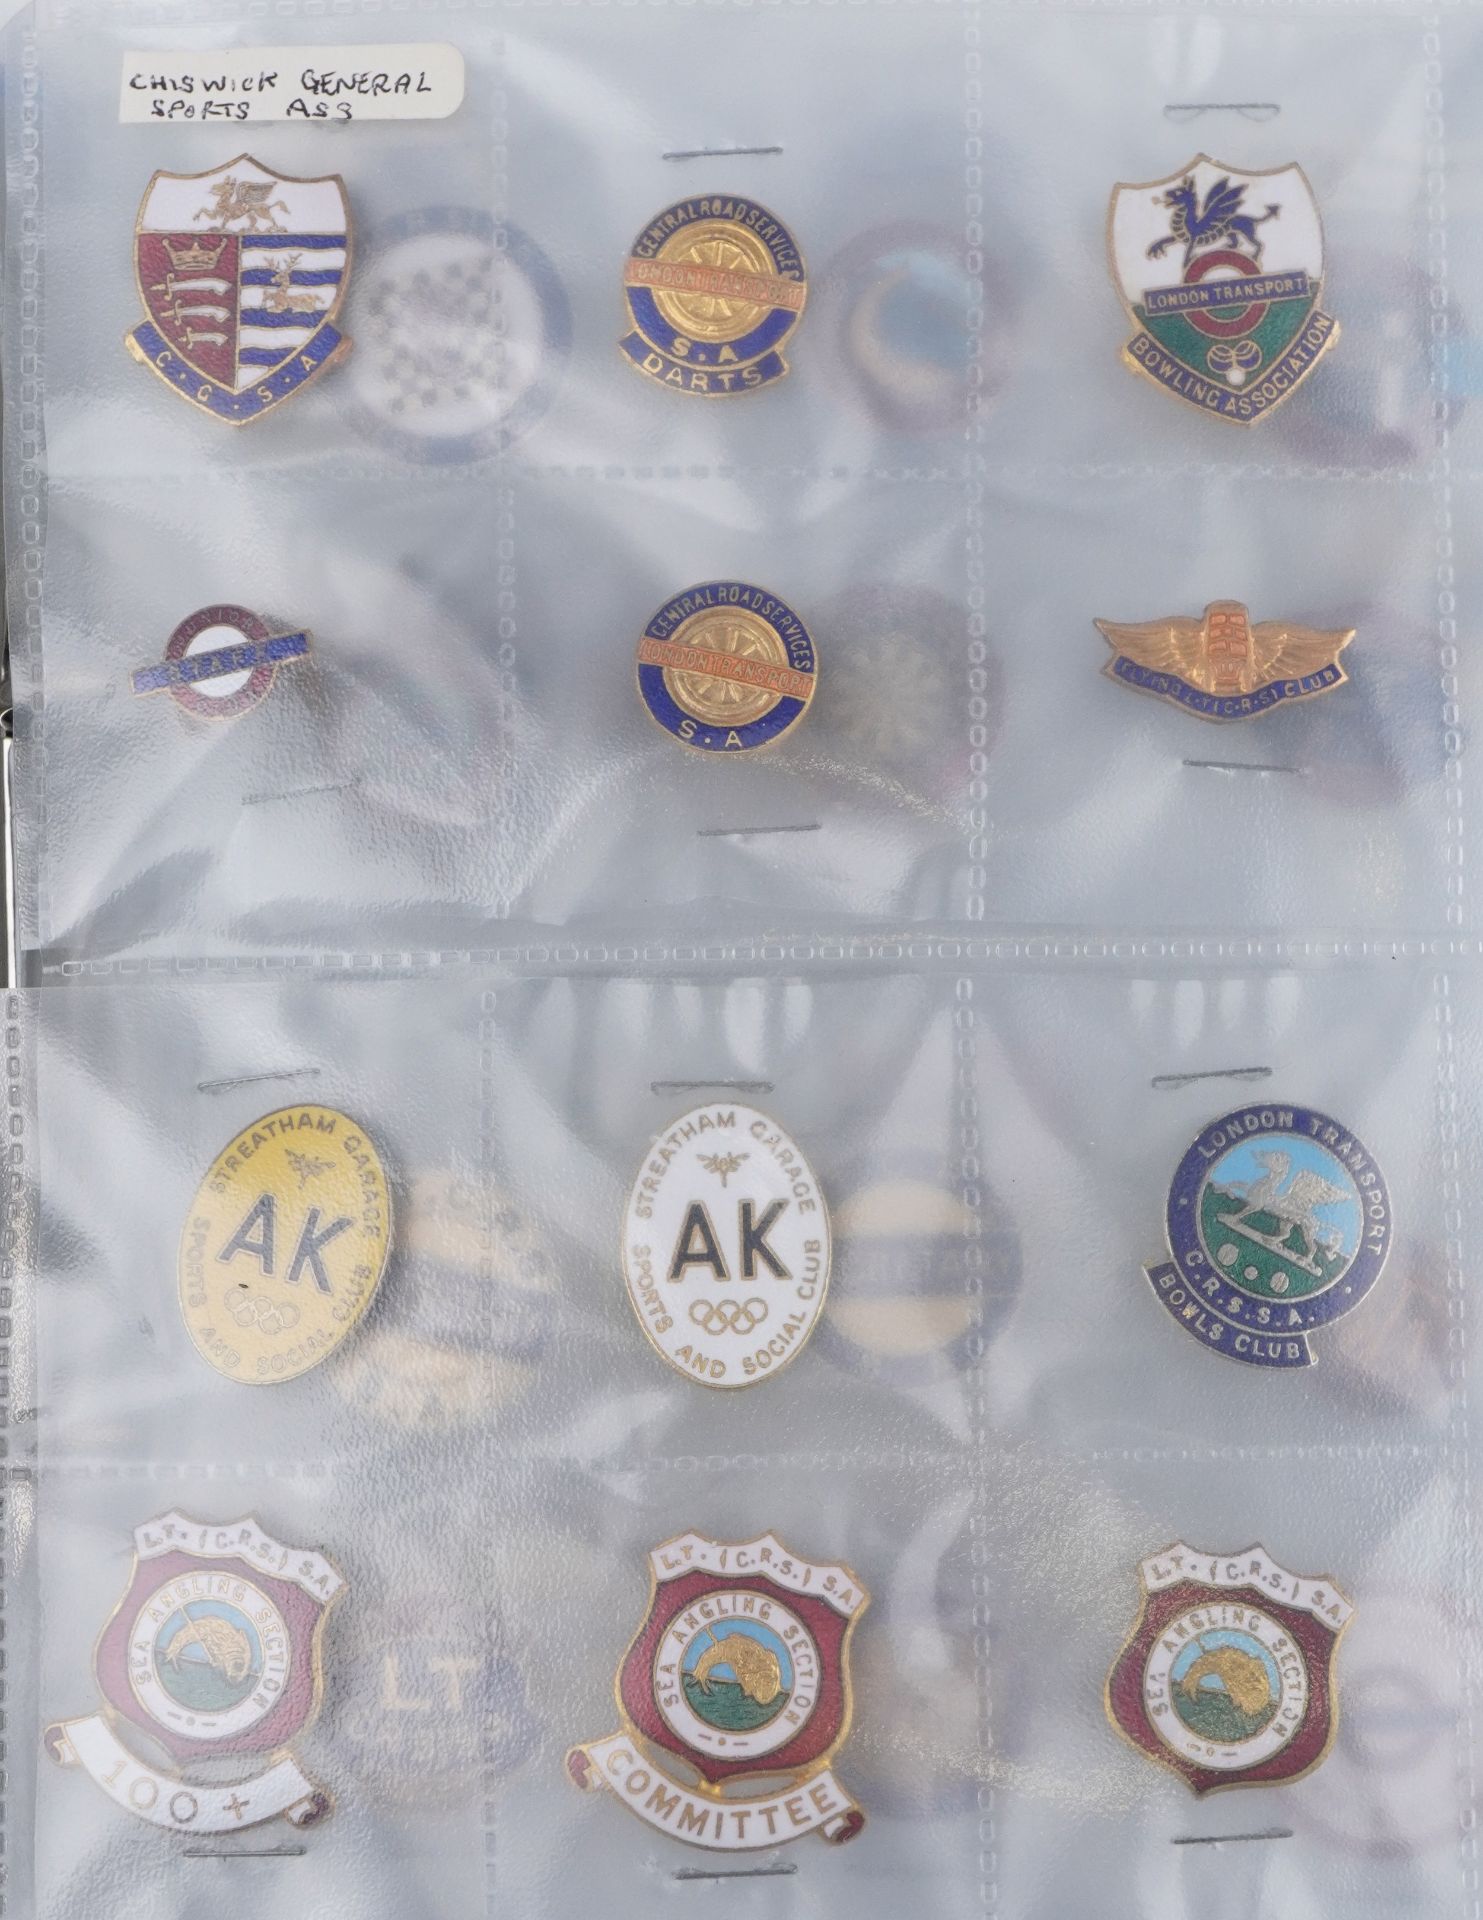 Large collection of automobilia and sporting interest badges and jewels, some arranged in an album - Image 5 of 14